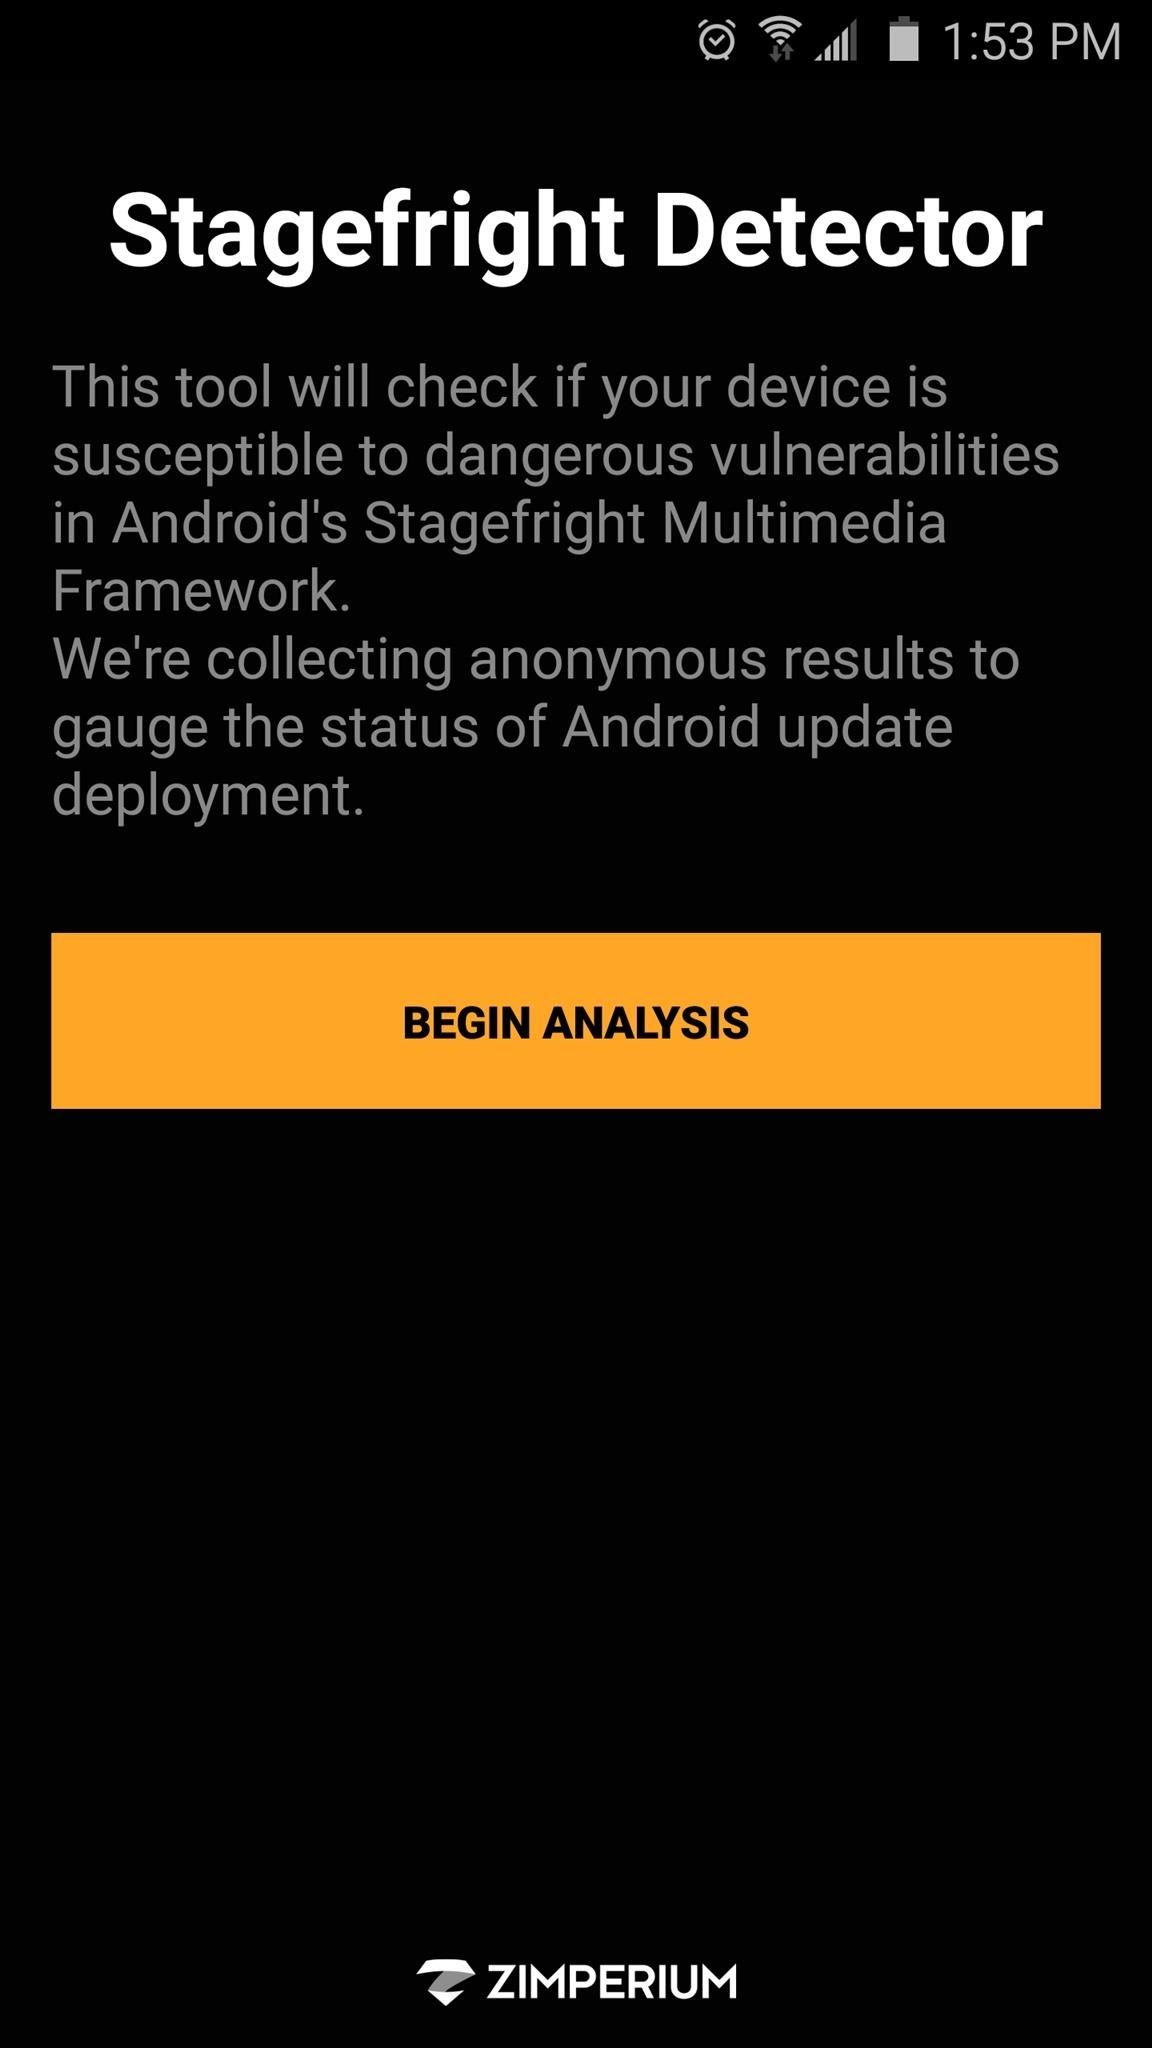 How to Check for the Stagefright Exploit on Your Android Device